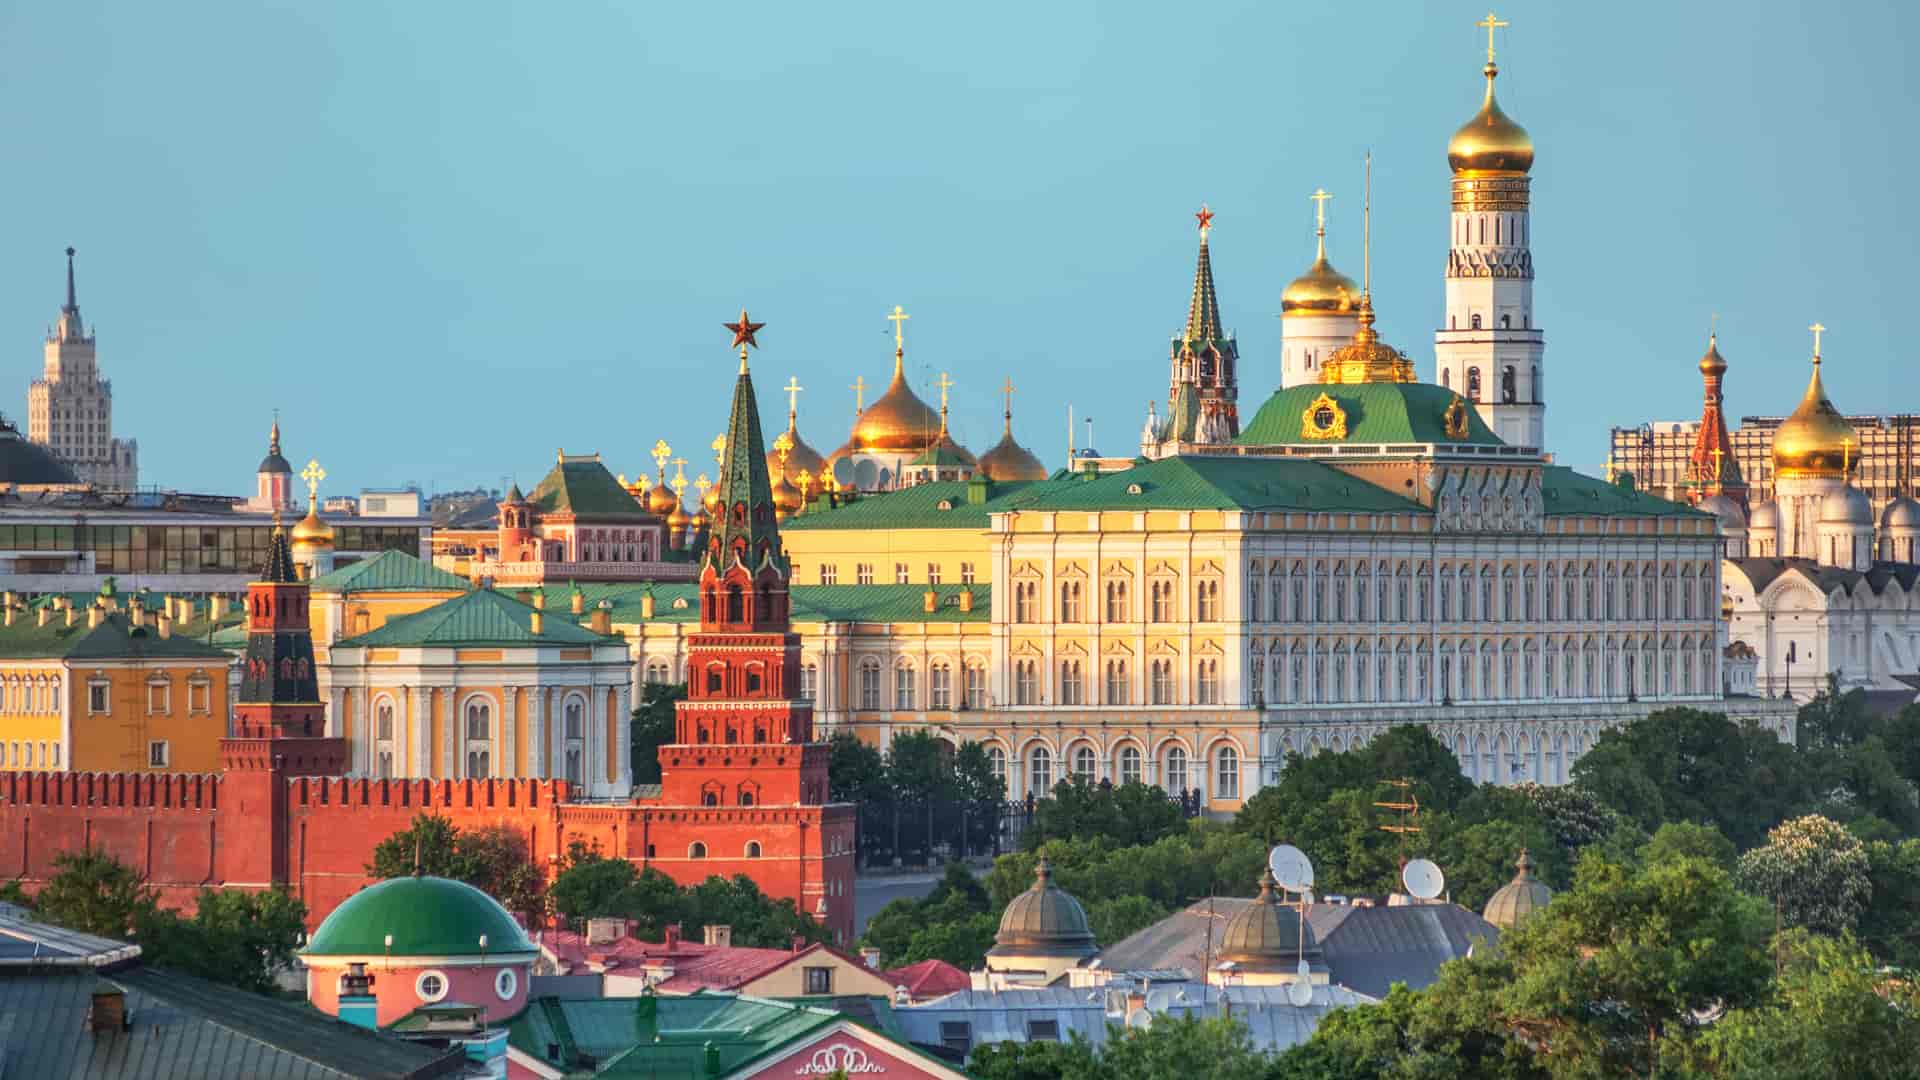 view-of-the-kremlin-in-moscow-russia-2021-08-26-18-57-02-utc